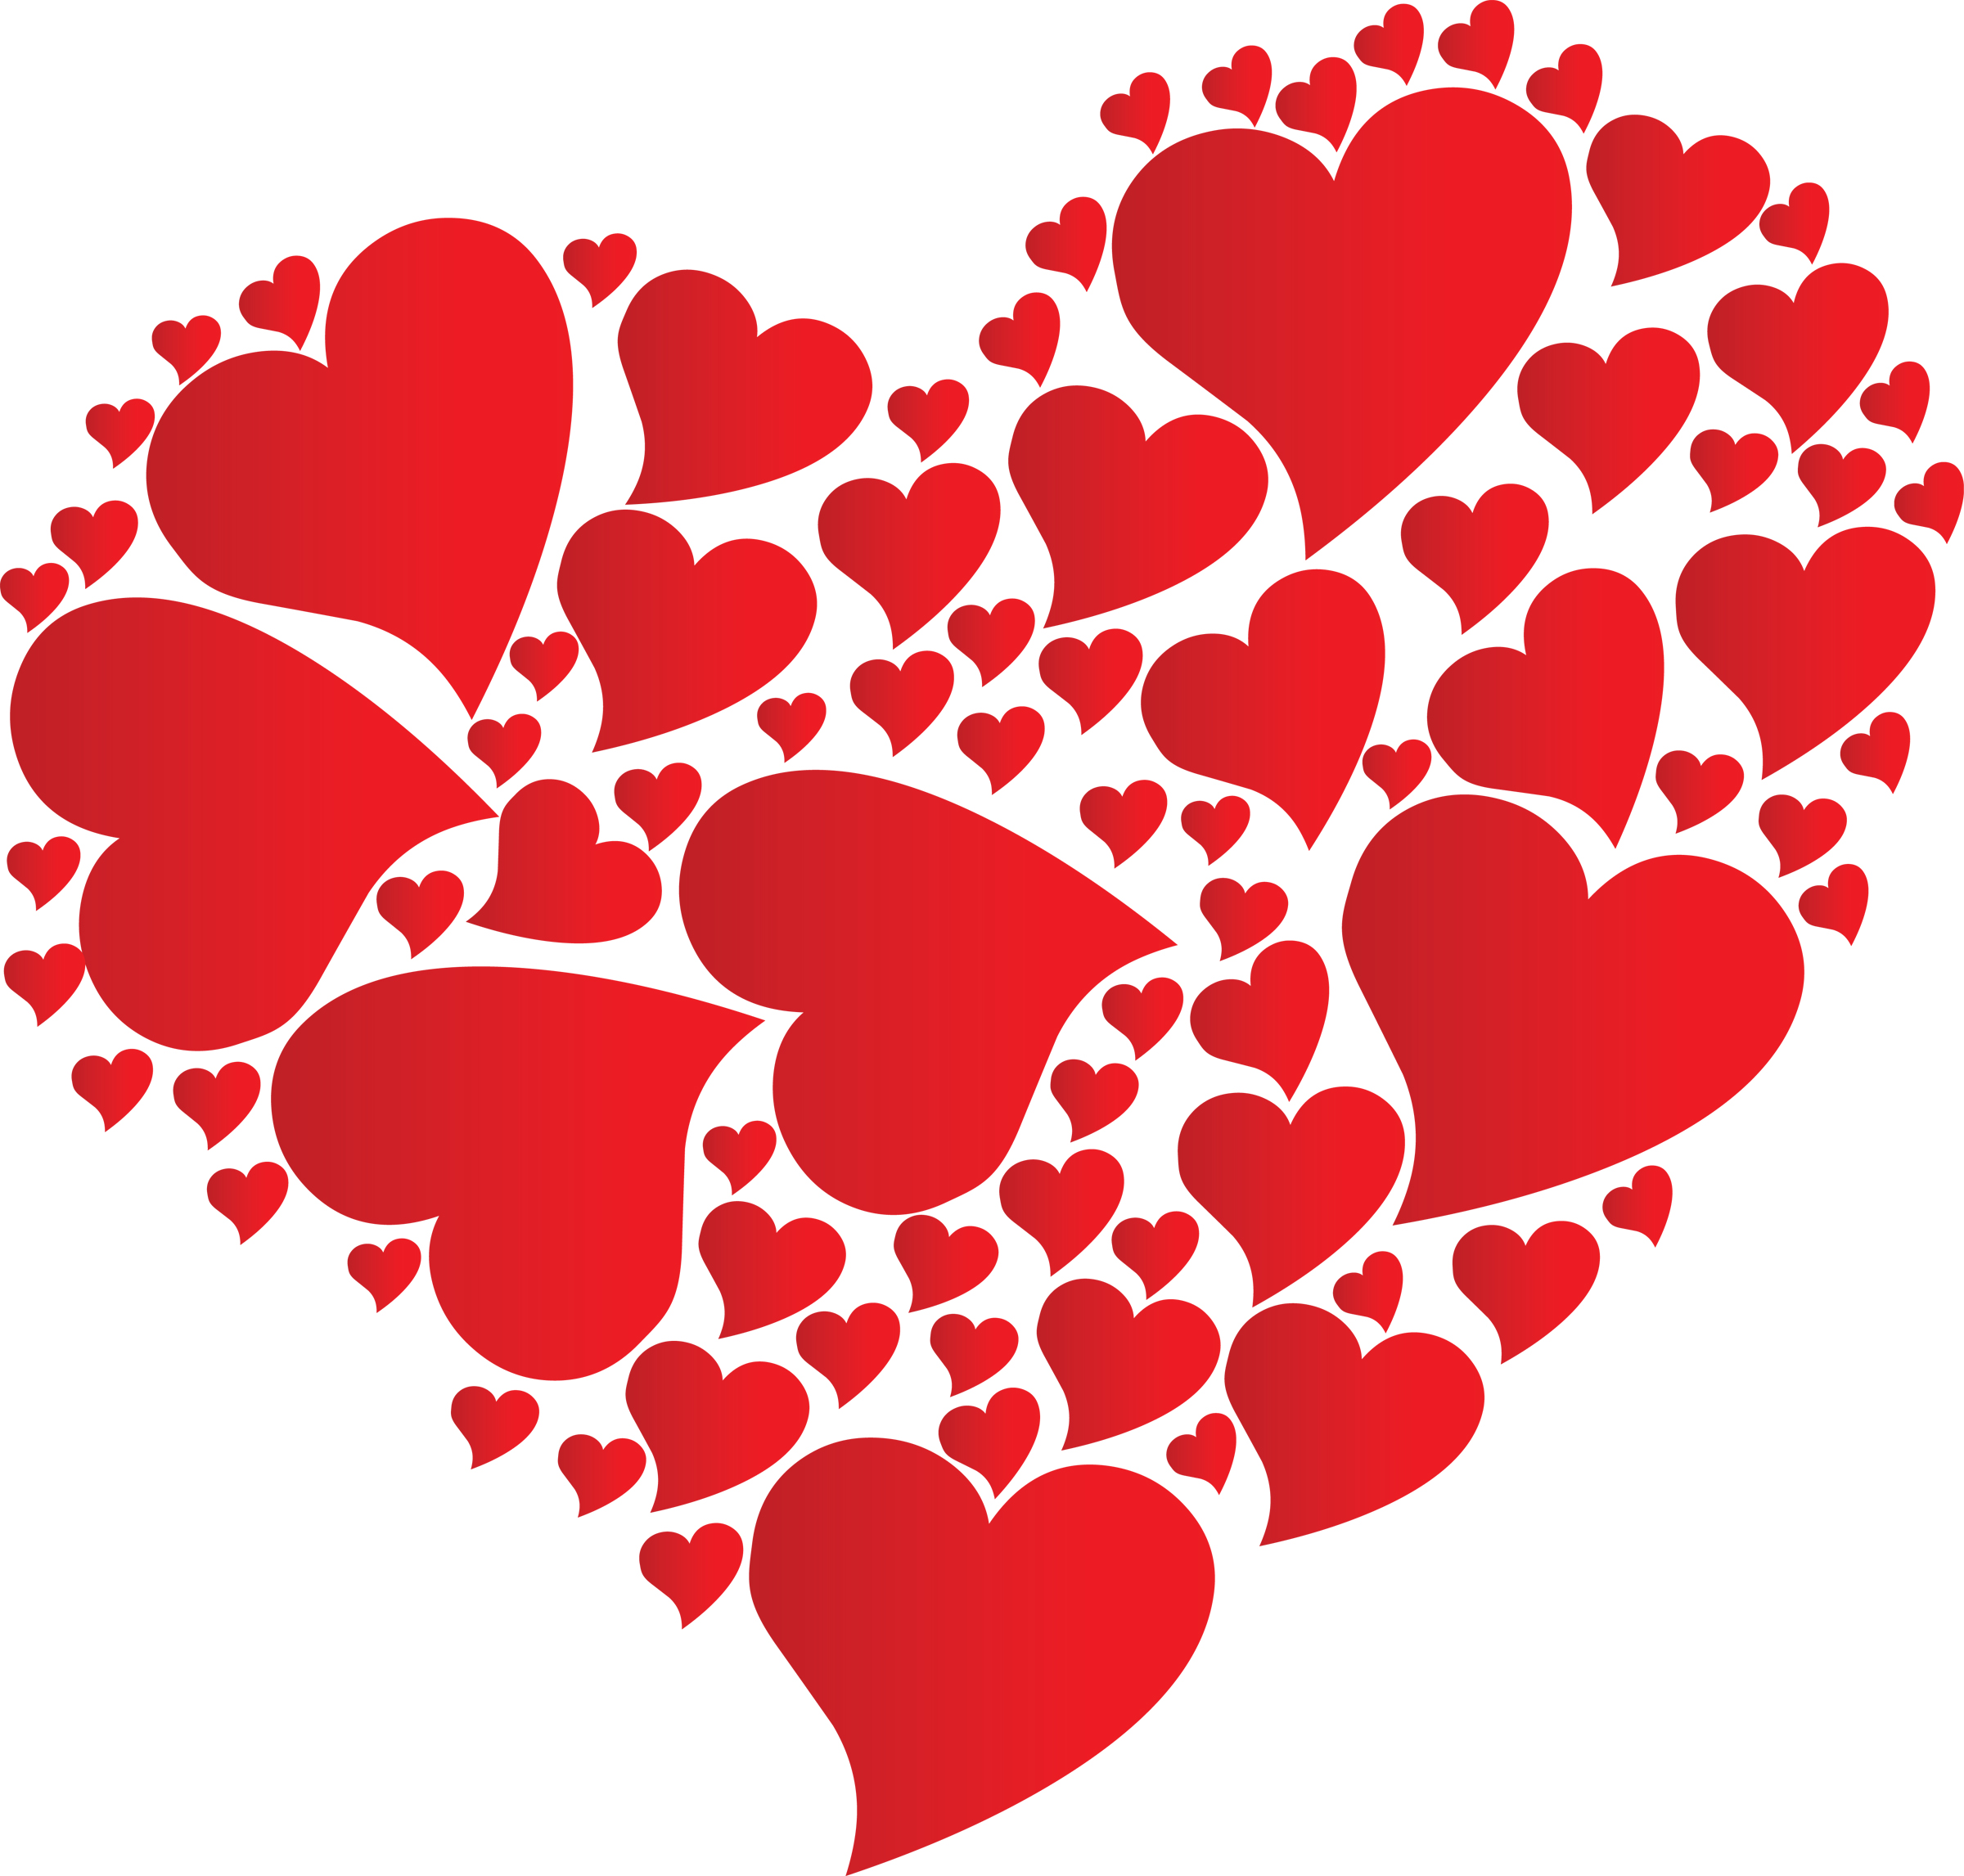 So For Those Of You Searching For Some Heart Clipart   Here You Go